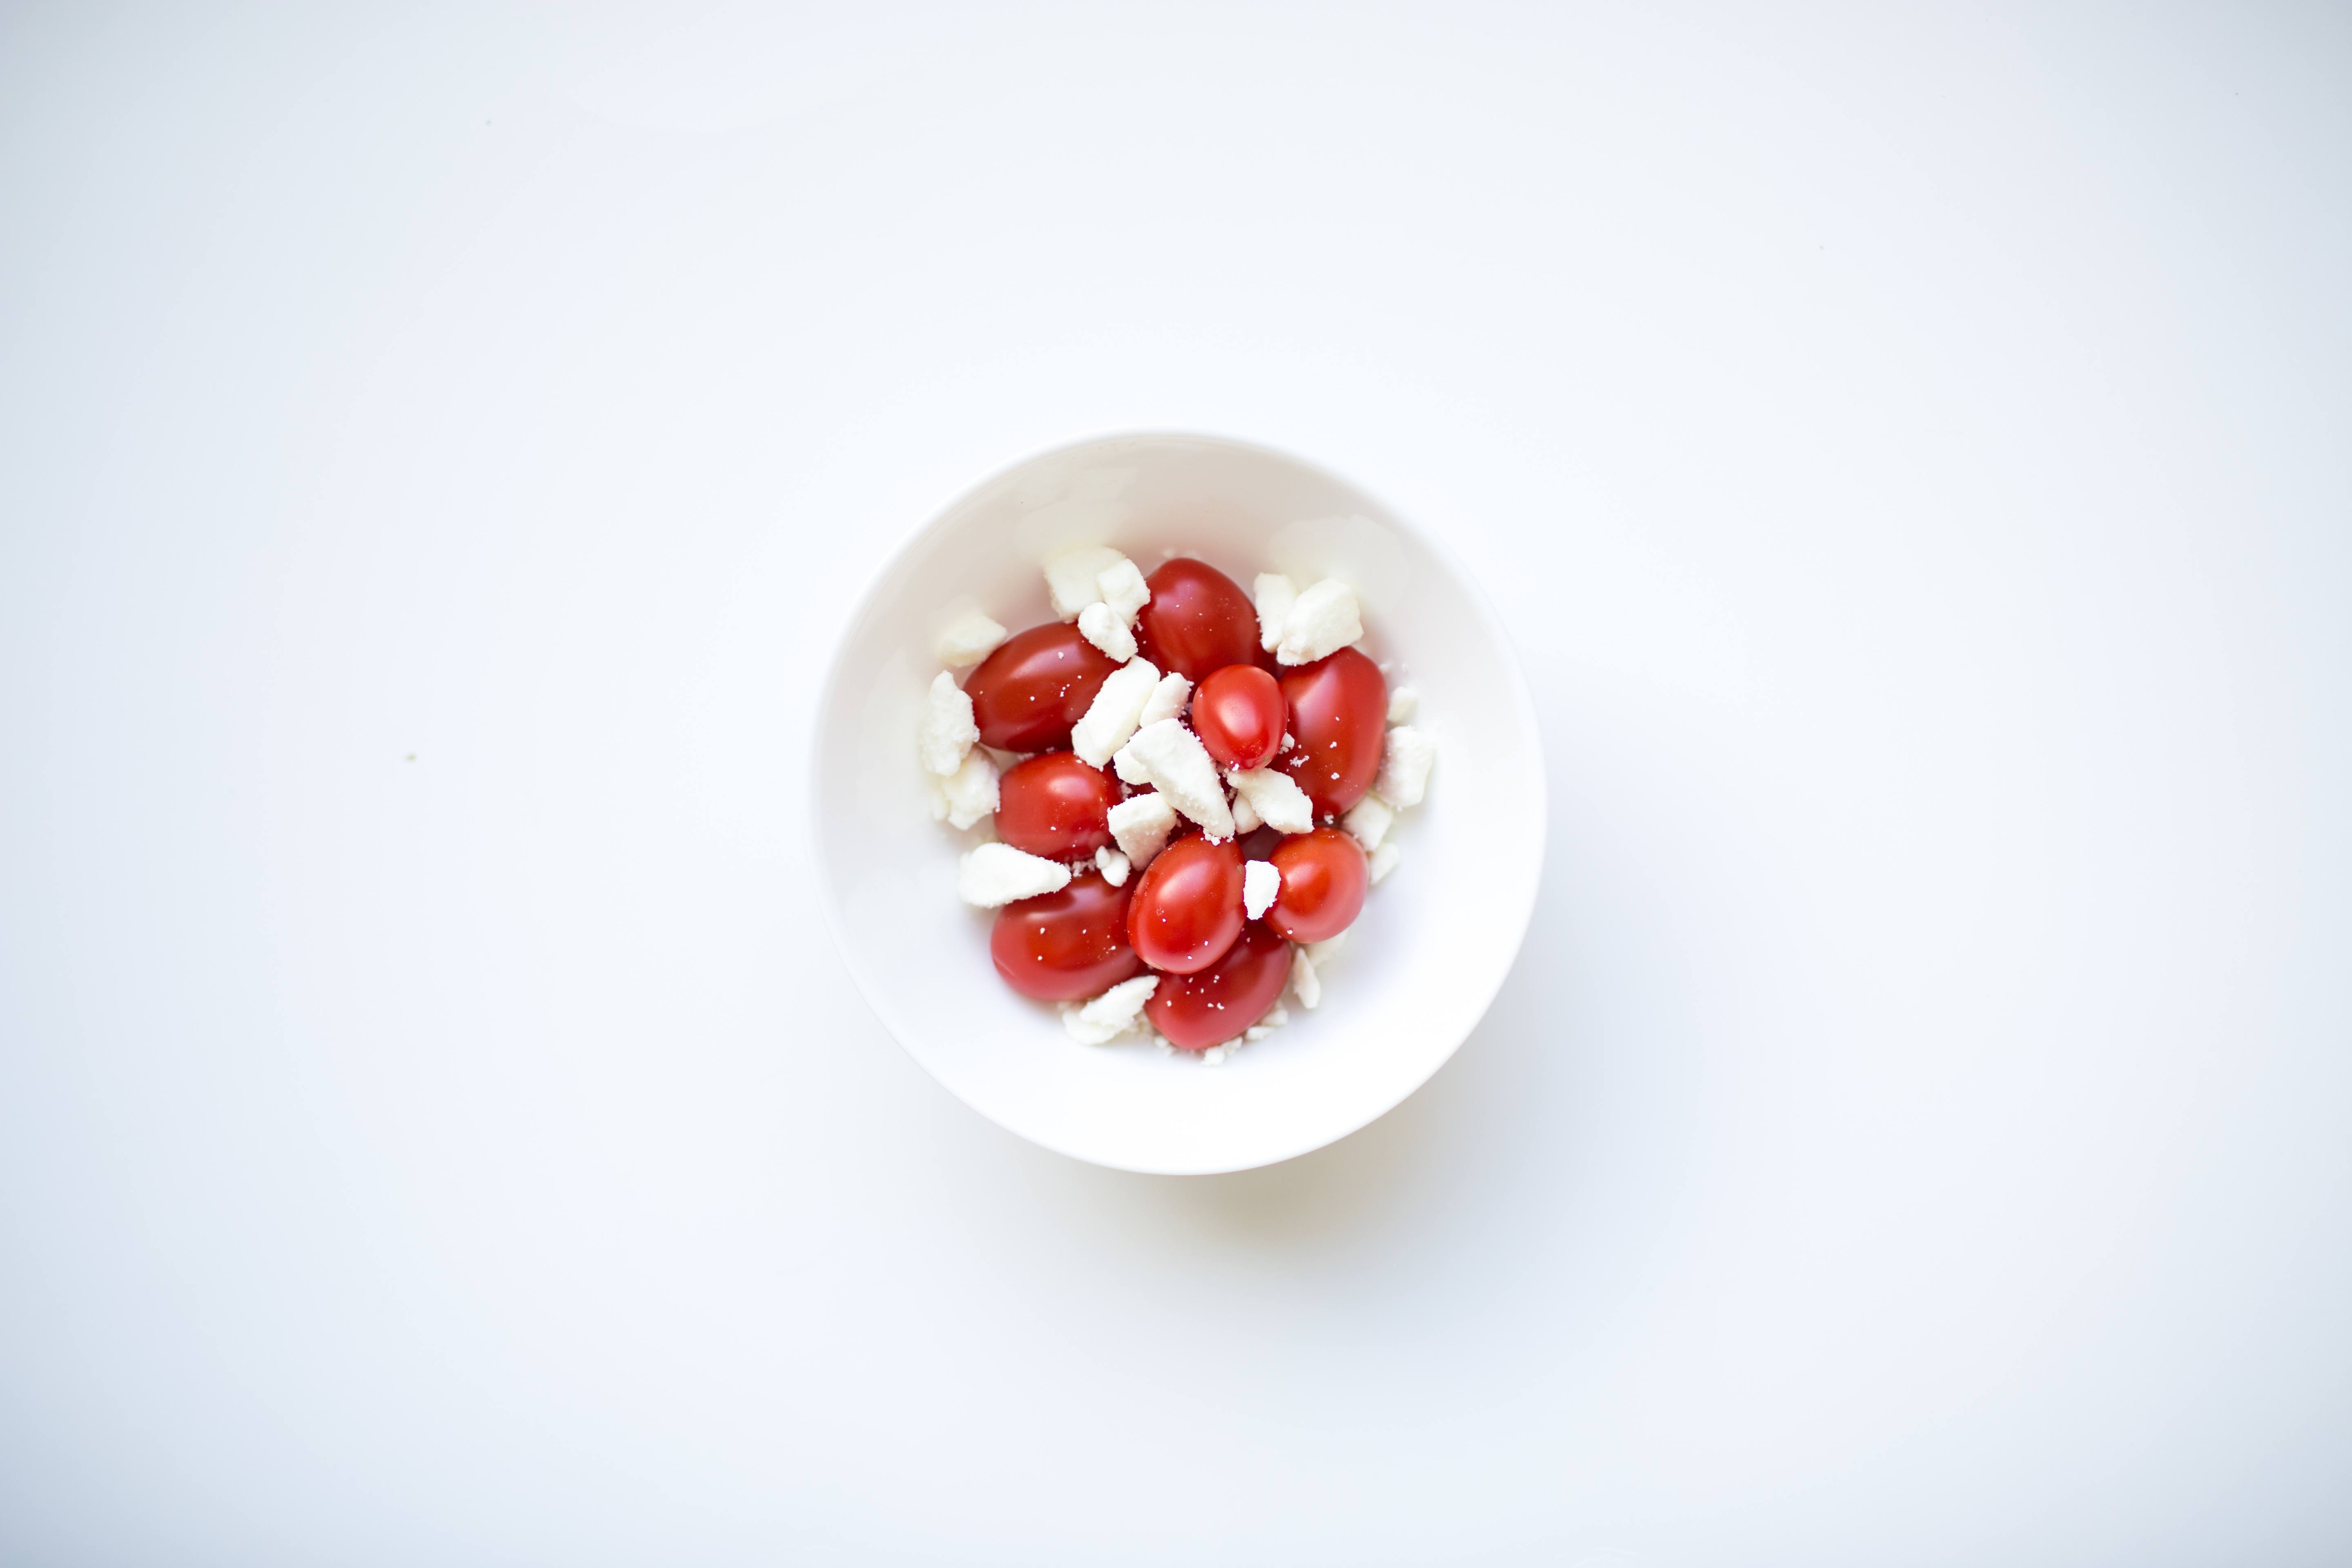 100 calorie snack cherry tomatoes and feta cheese